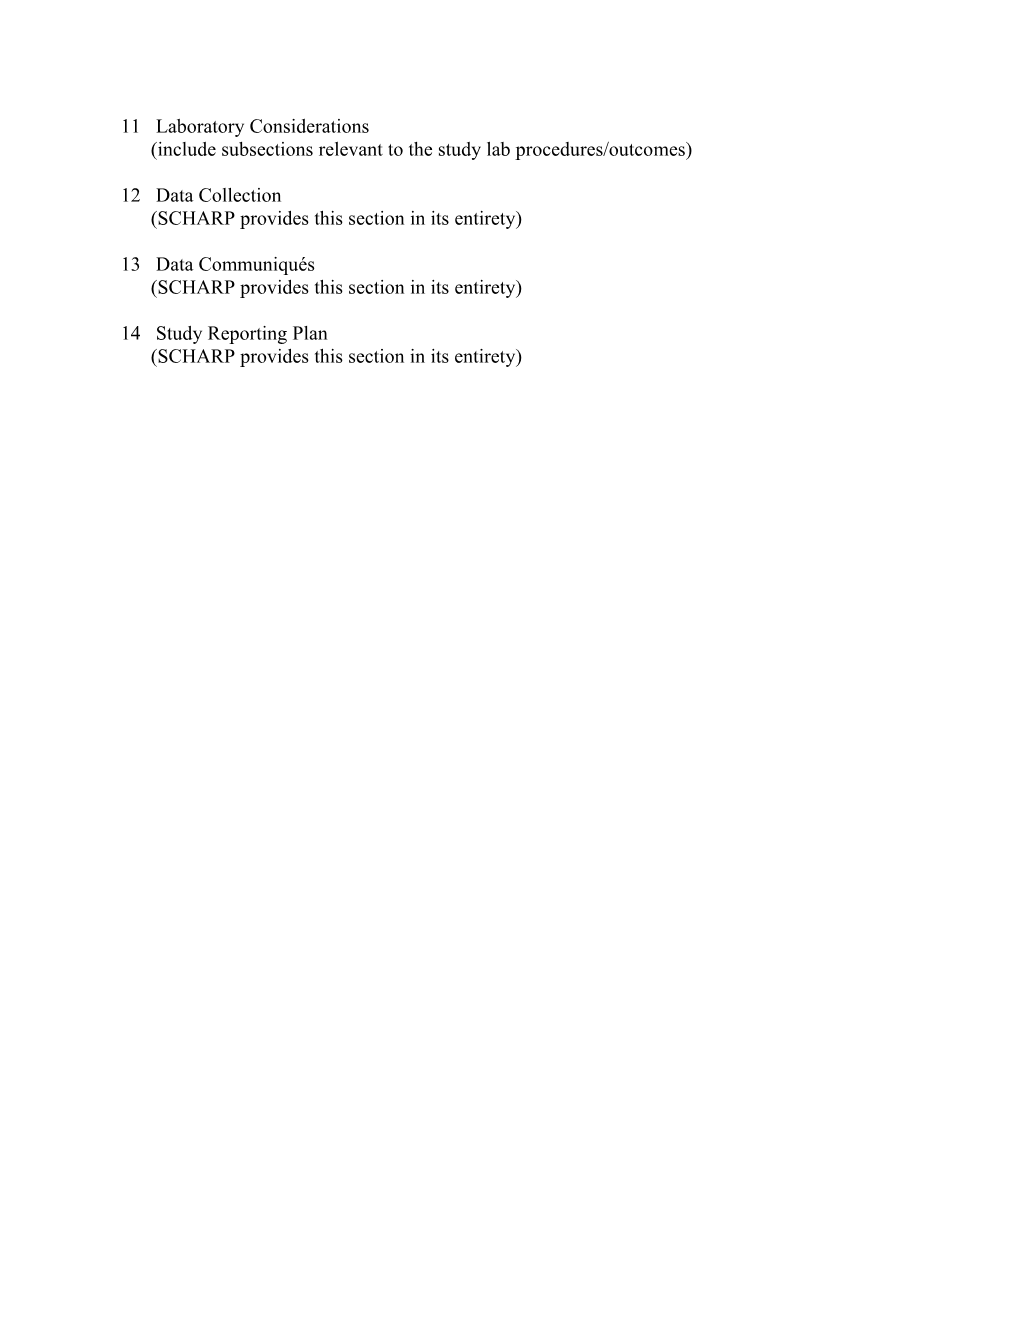 Template Table of Contents for HPTN Study-Specific Procedures Manual